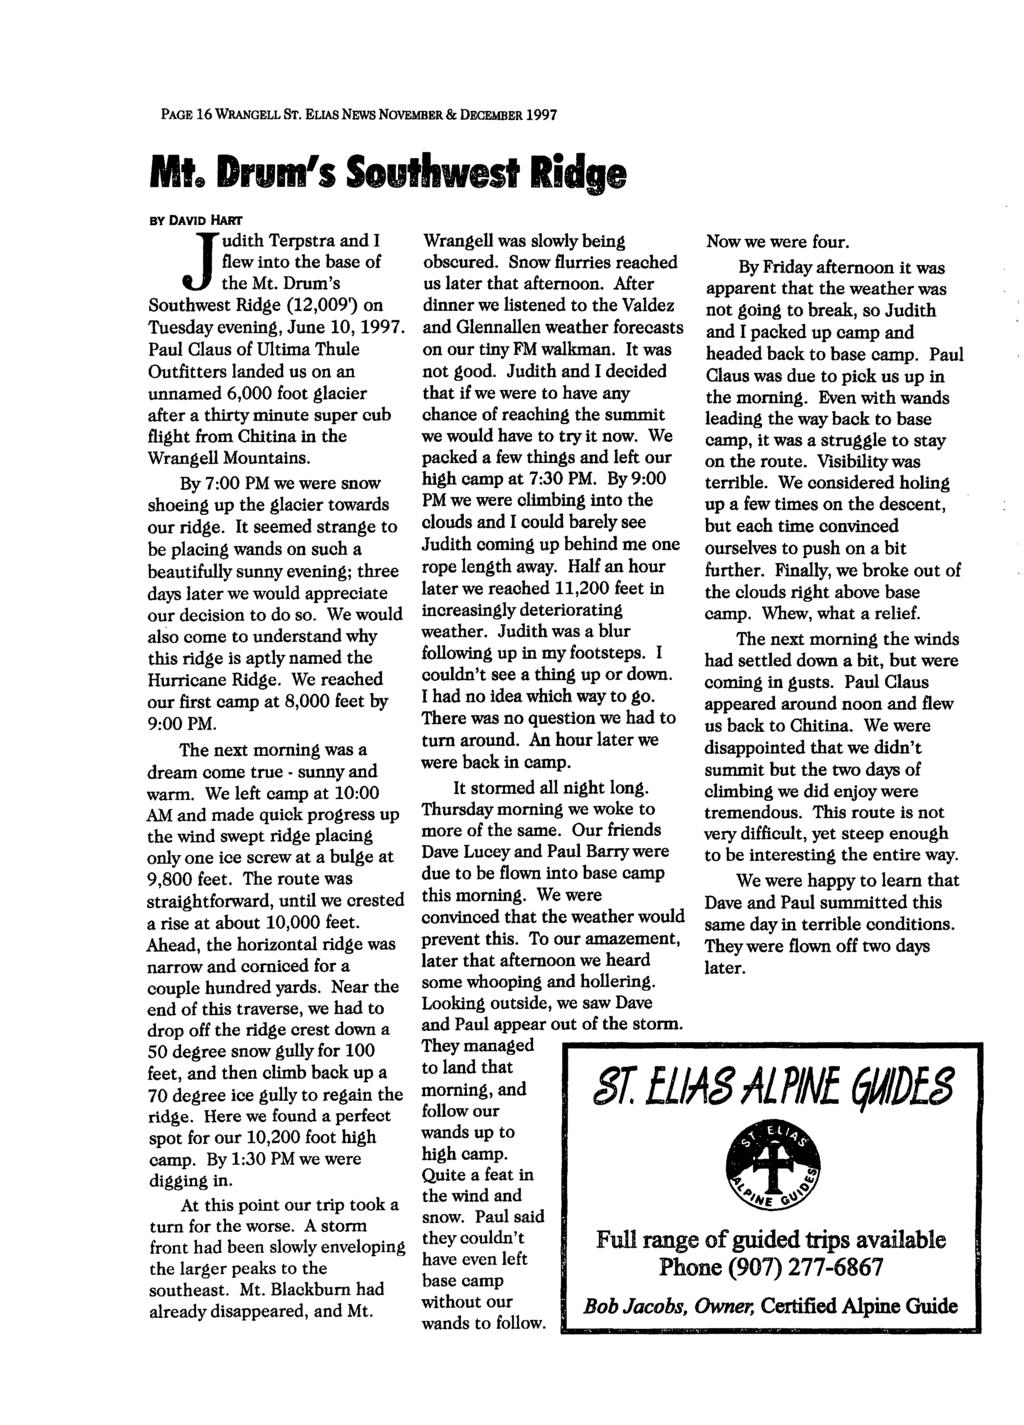 PAGE 16 WRANGELL ST. ELIAS NEWS NOVEMBER & DECEMBER 1997 Mt. Drum's Southwest Ridge BY DAVID HART Judith Terpstra and I flew into the base of the Mt.